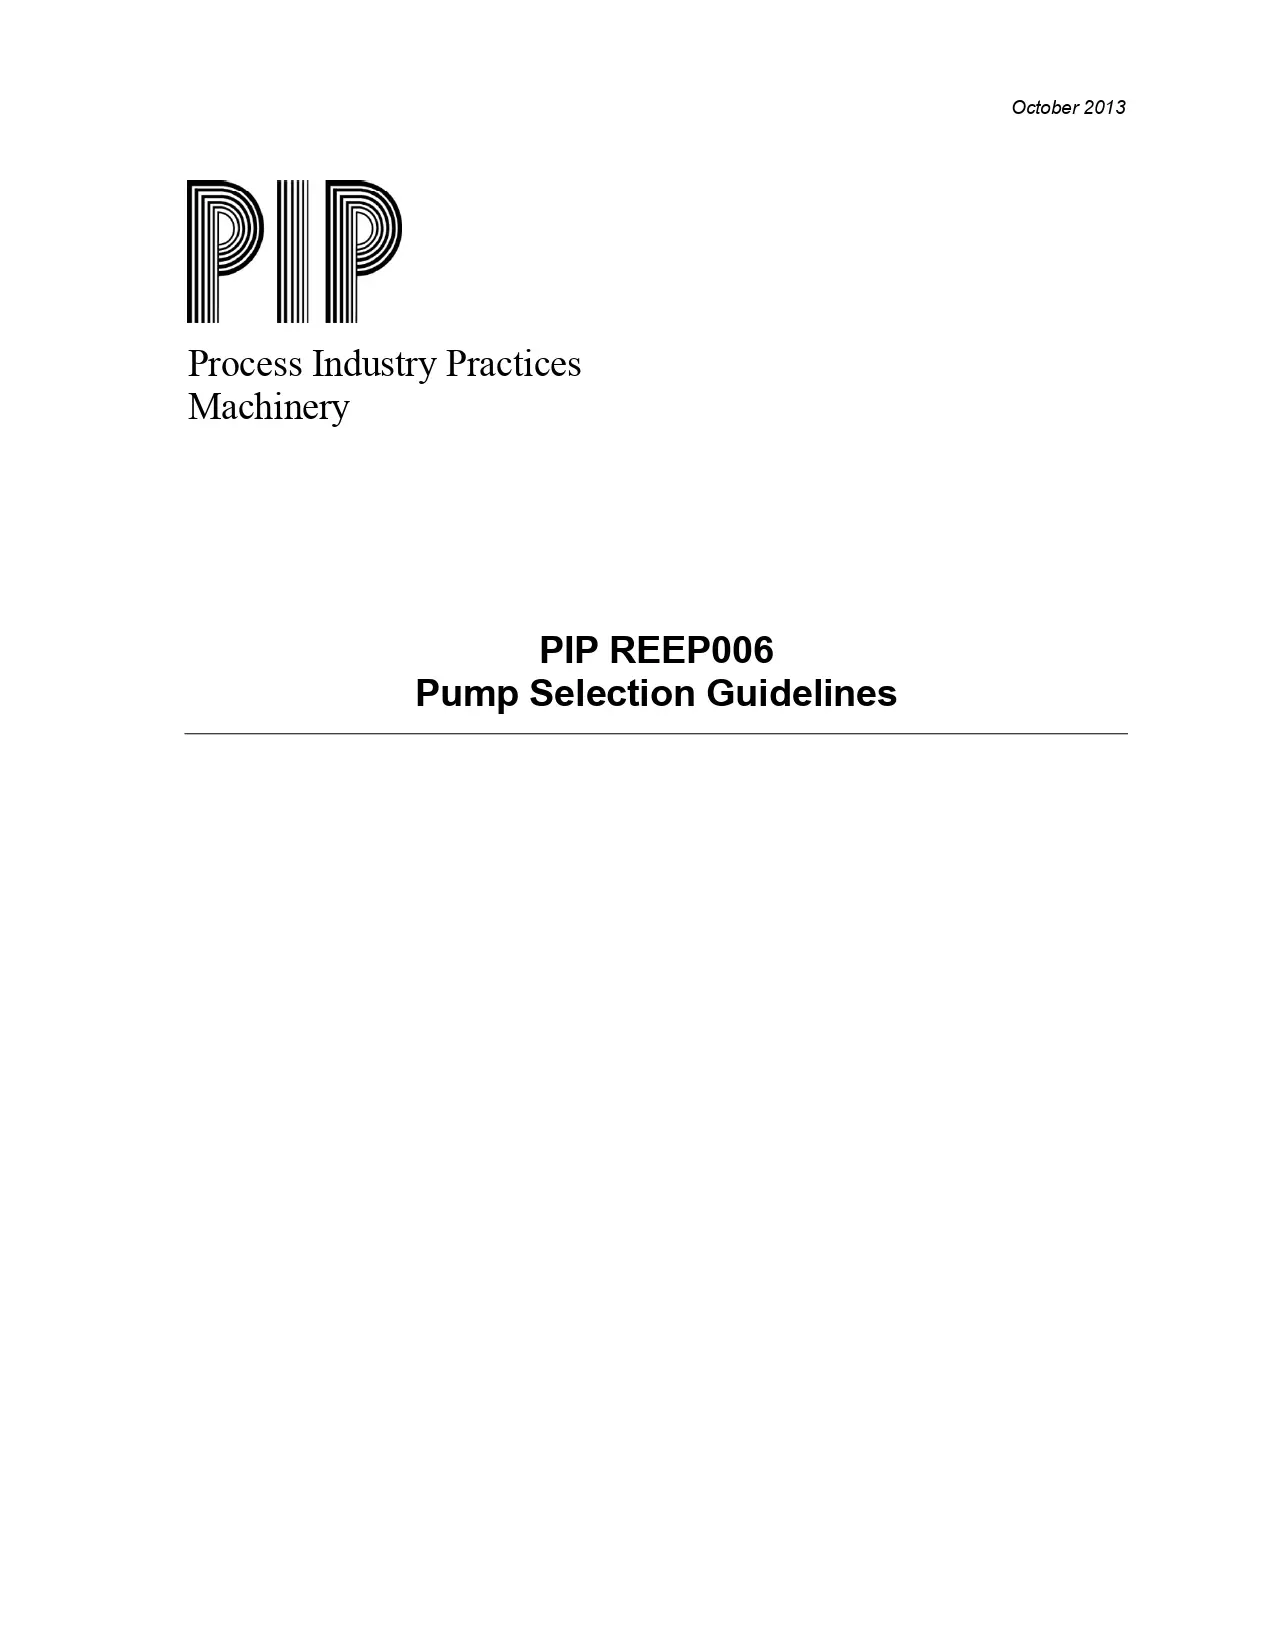 Pump Selection Guidelines